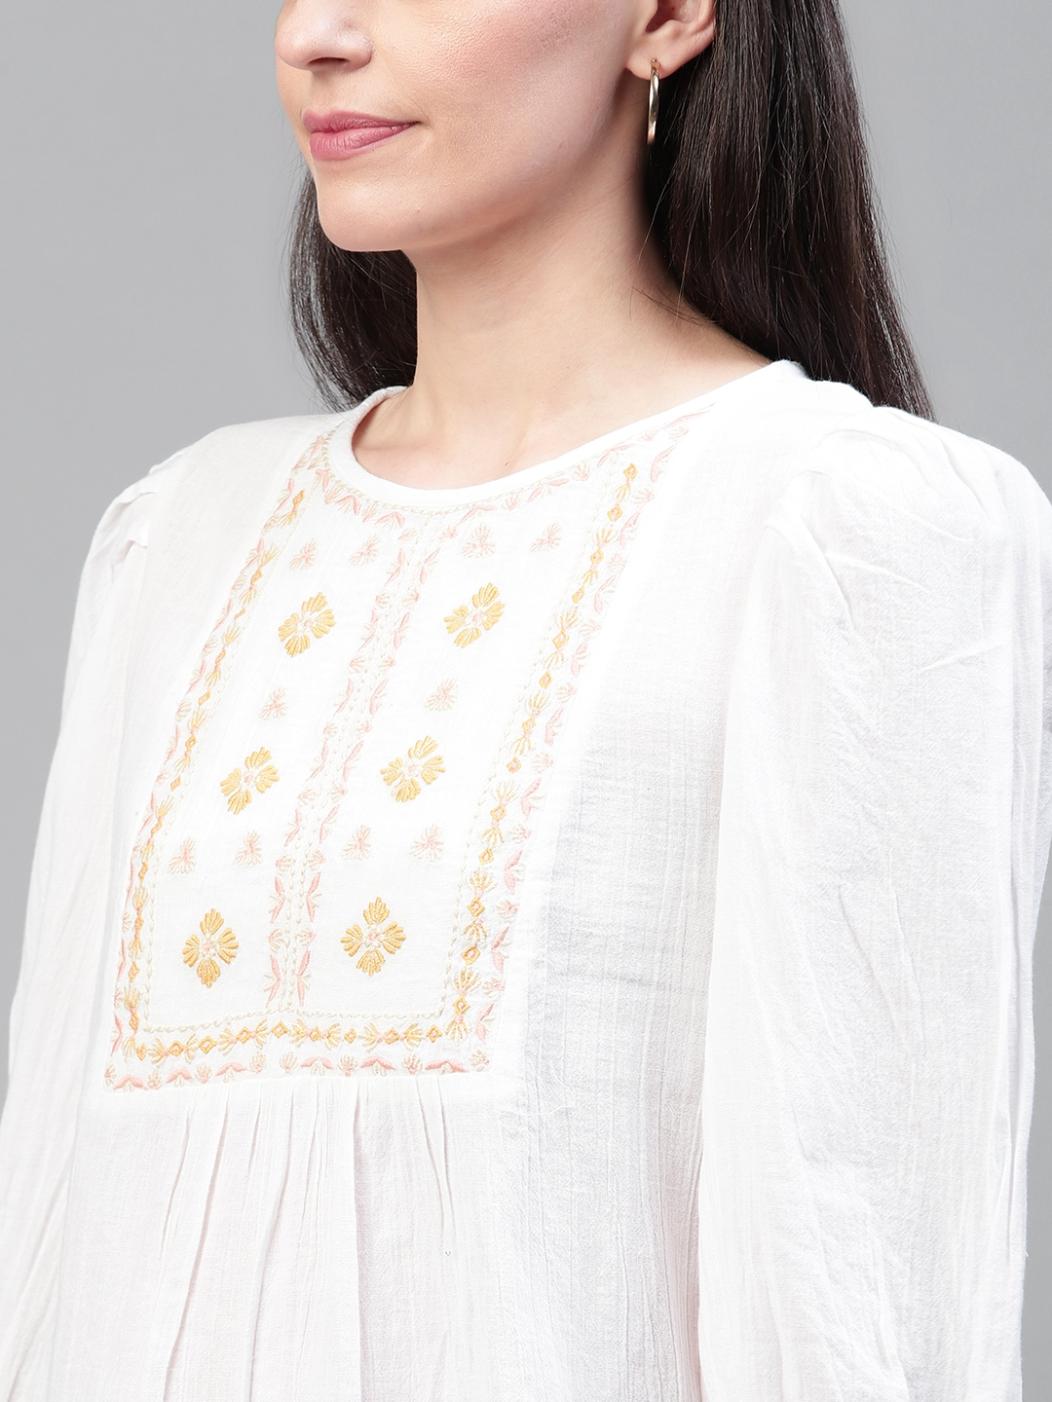 White Yoke Embroidered Top